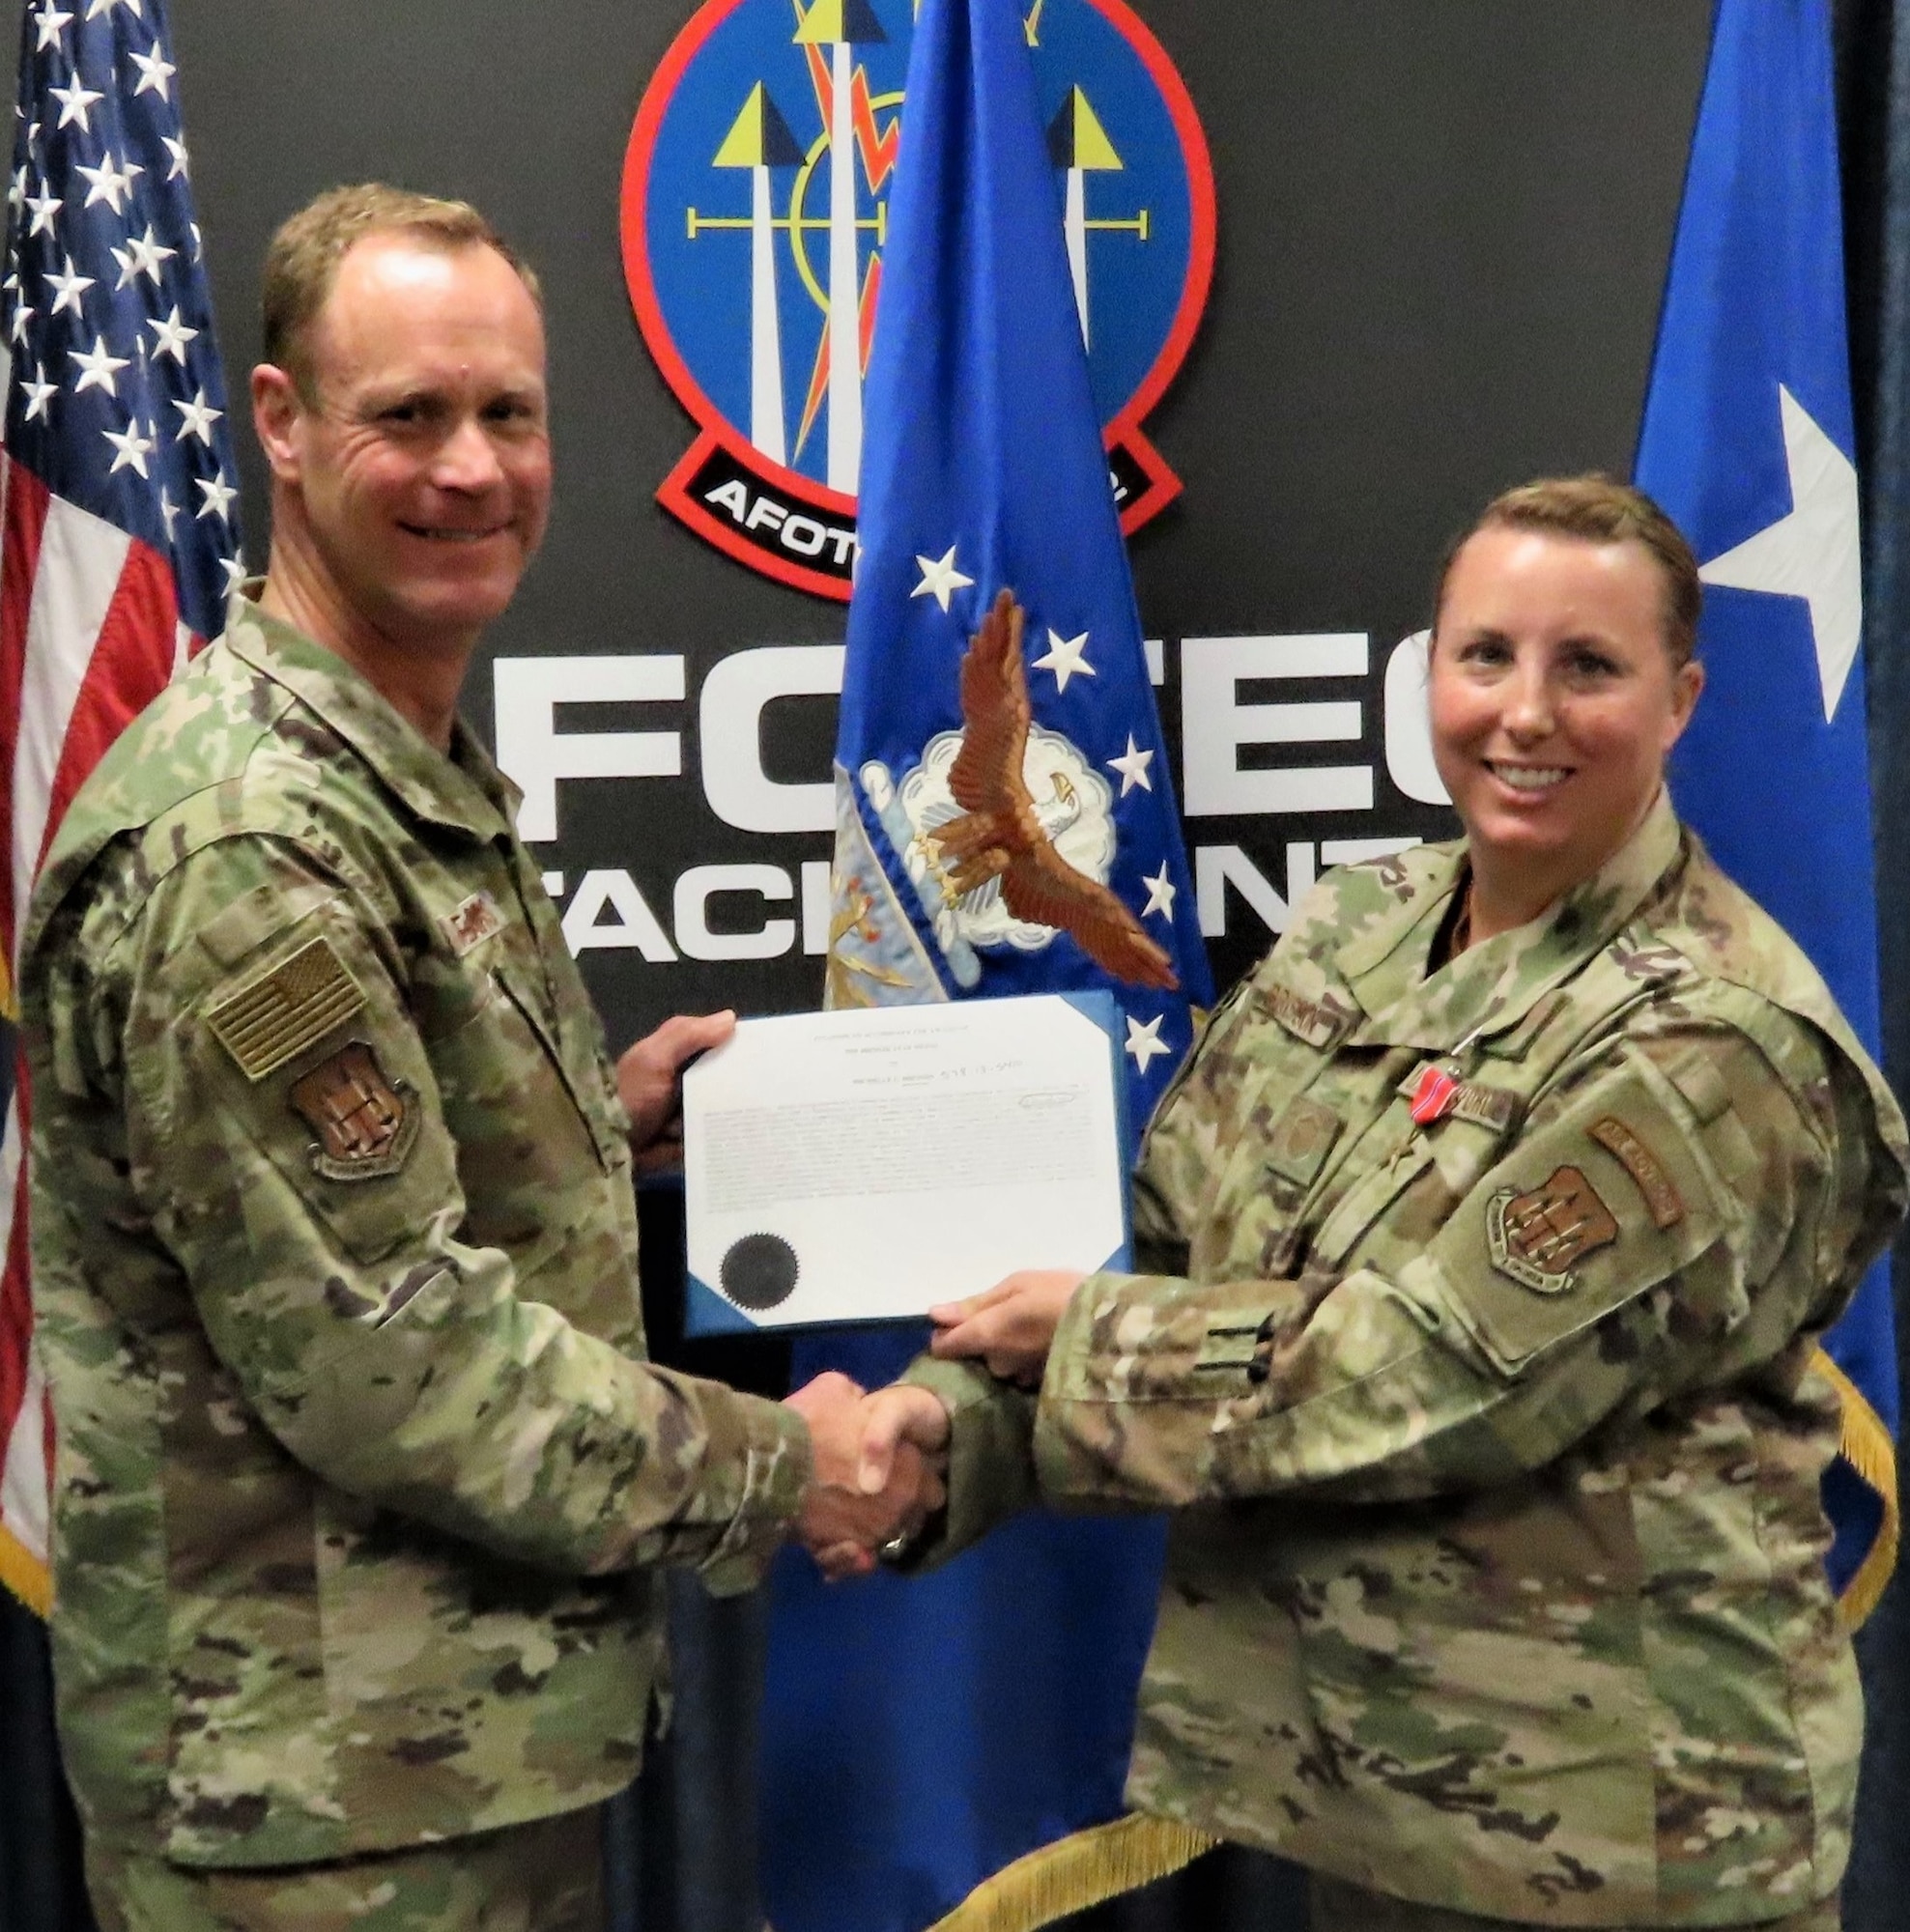 Air Force Operational Test and Evaluation Center Commander Maj. Gen. James R. Sears Jr., presents Master Sgt. Michelle Bresson the Bronze Star Medal for meritorious achievement while deployed to Afghanistan.